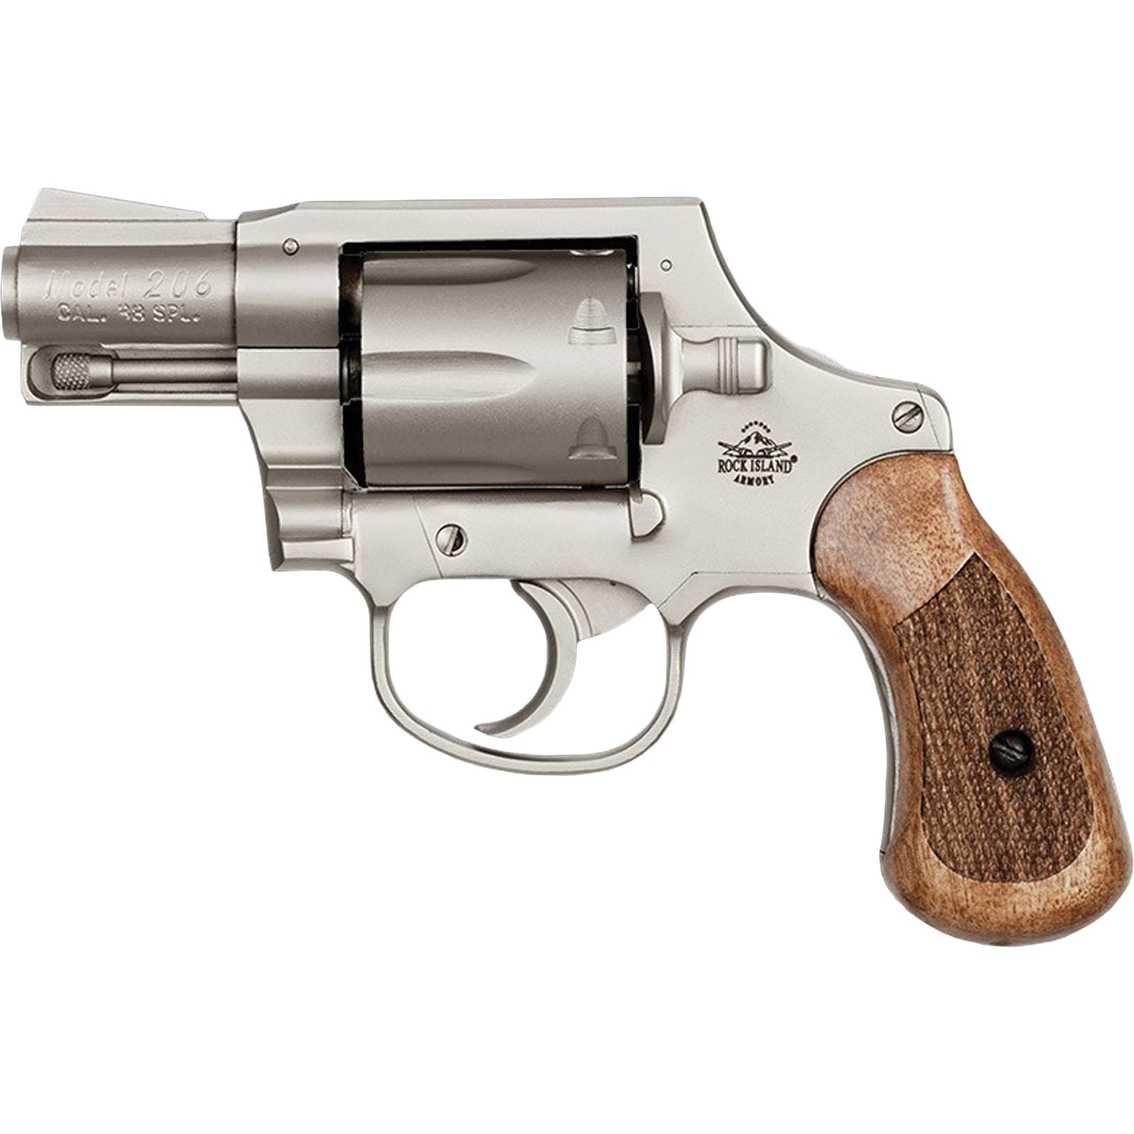 Armscor 206 Spurless 38 Special 2 in. Barrel 6 Rds Revolver Silver - Image 2 of 2